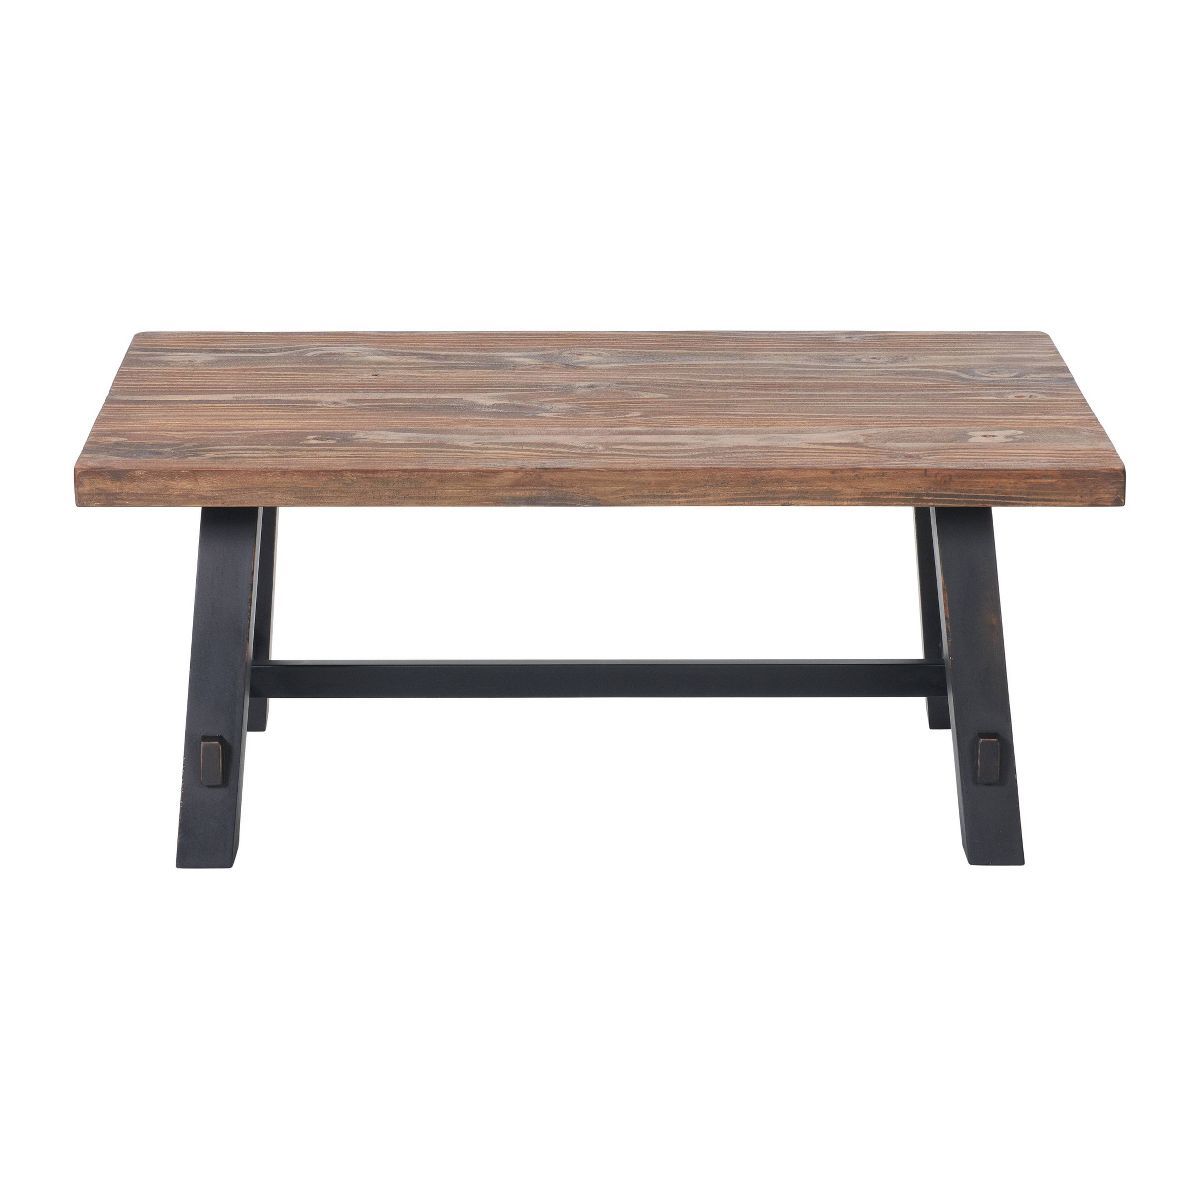 42" Odin Solid Wood Coffee Table Black - Alaterre Furniture | Target